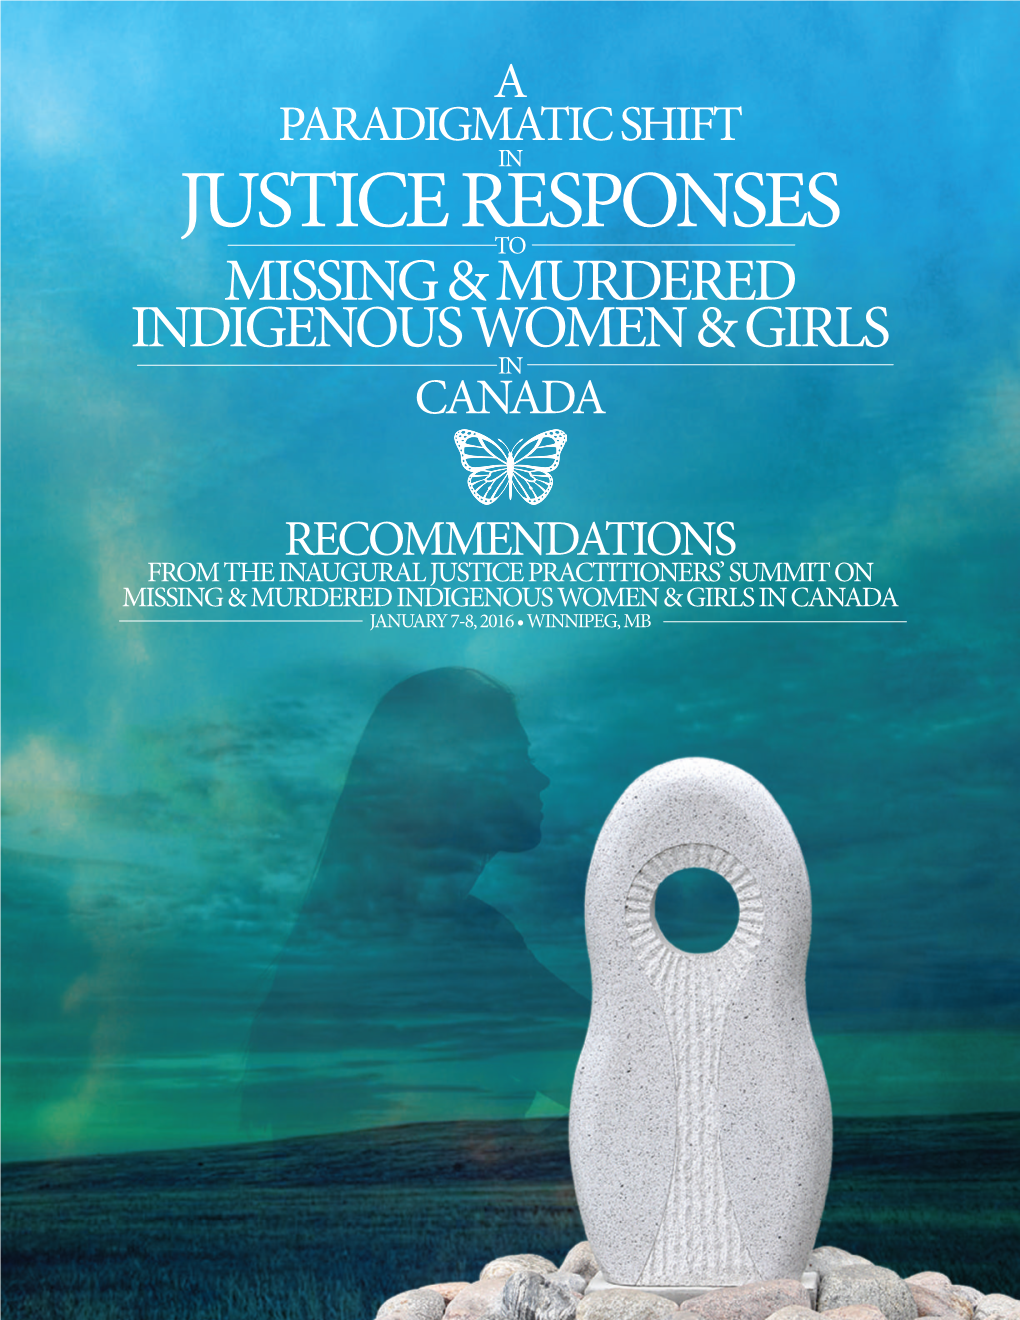 Justice Responsesto Missing & Murdered Indigenous Women & Girls in Canada